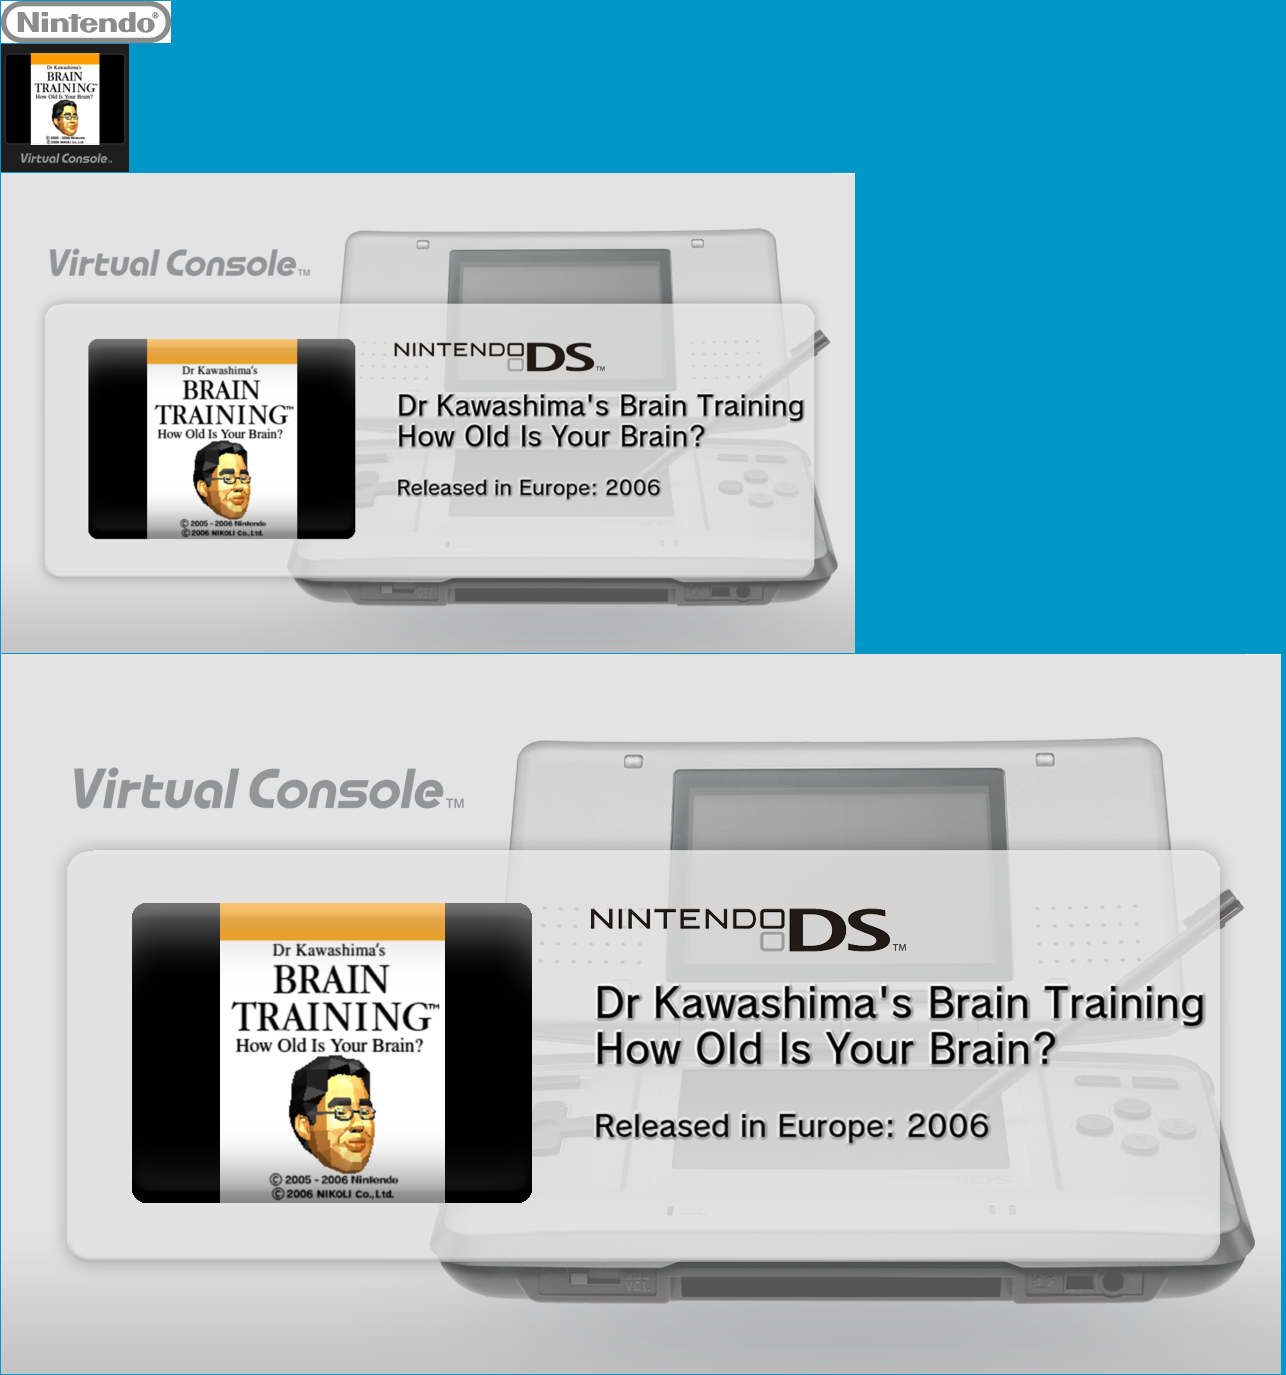 Virtual Console - Dr. Kawashima's Brain Training How Old Is Your Brain?